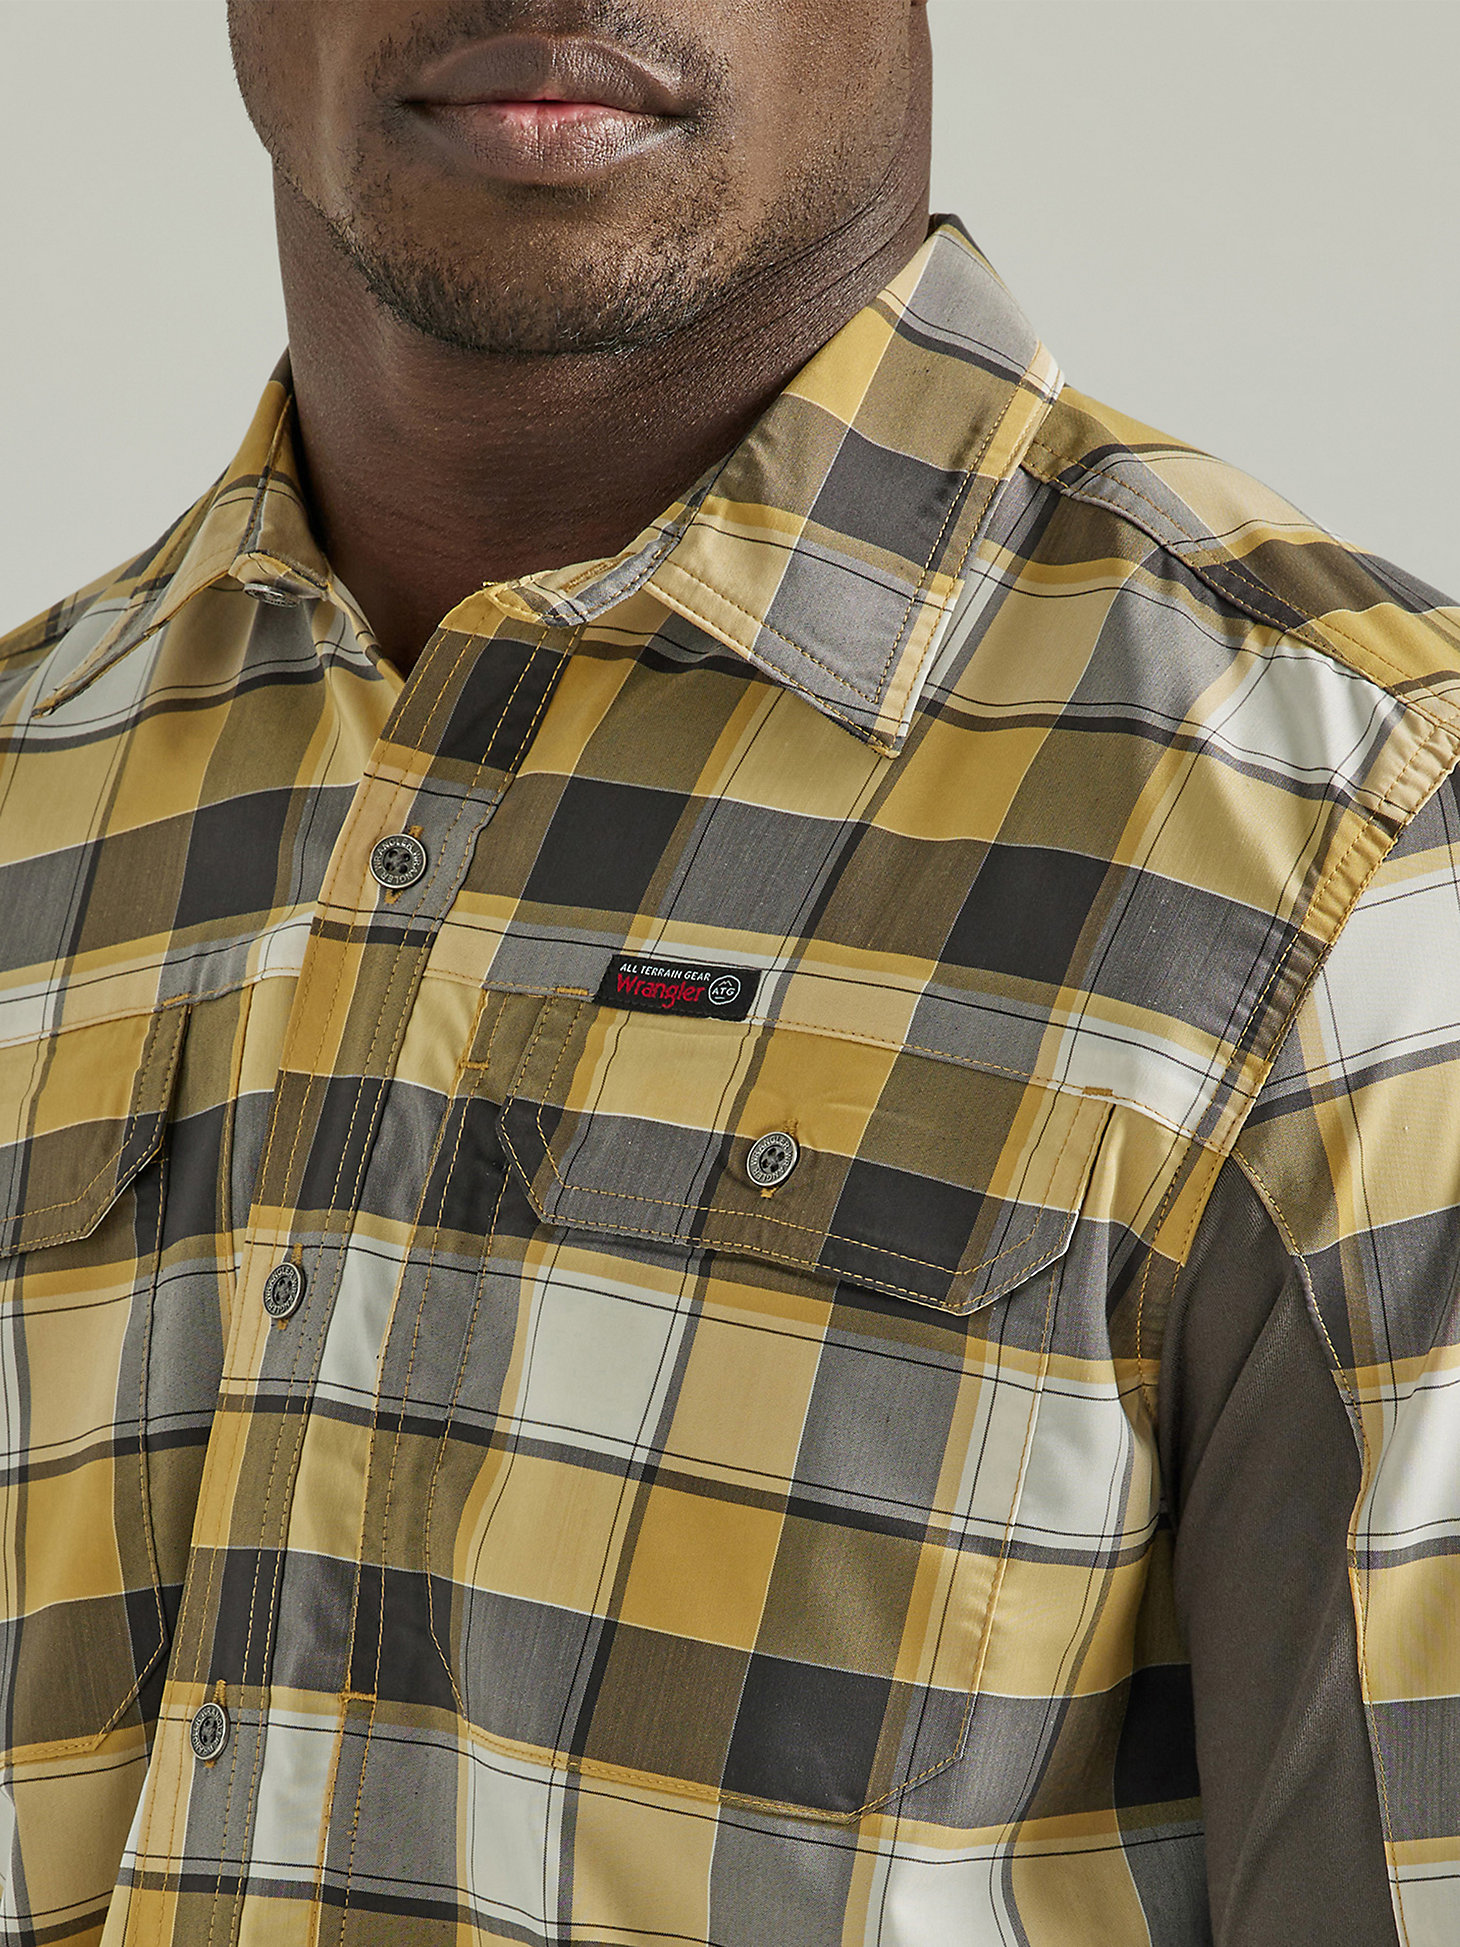 ATG By Wrangler™ Plaid Mixed Material Shirt in Travertine alternative view 3